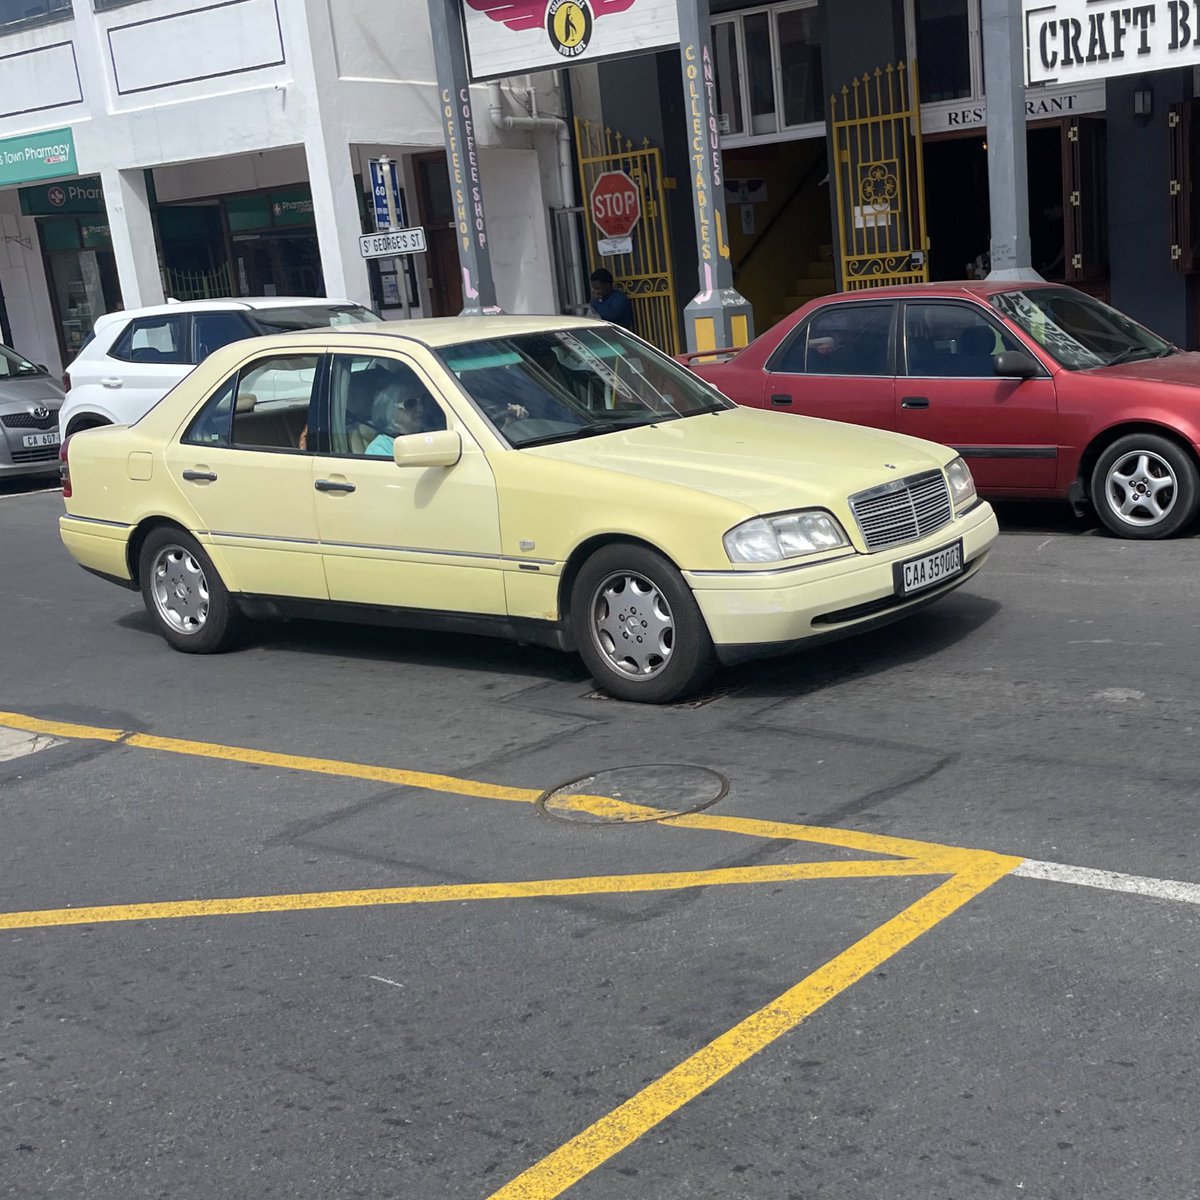 Not a car spotting page, but, old rusty Mercs in Cape Town….. Driving the 107 wins in the sun, despite a saggy interior and the wrong wheels.